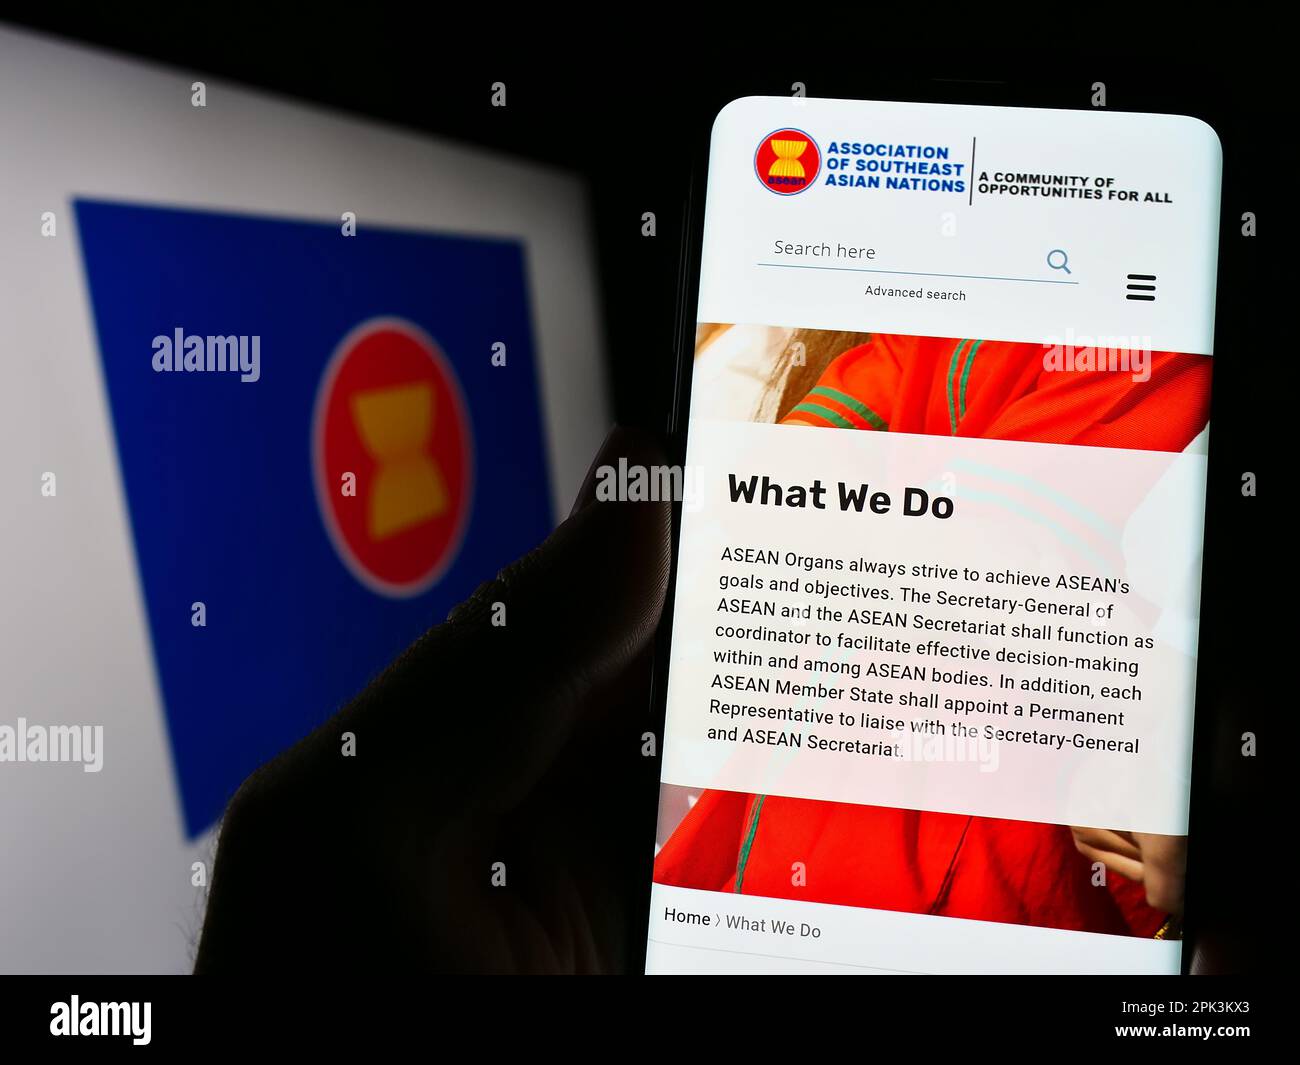 Person holding cellphone with webpage of Association of Southeast Asian Nations (ASEAN) on screen with logo. Focus on center of phone display. Stock Photo